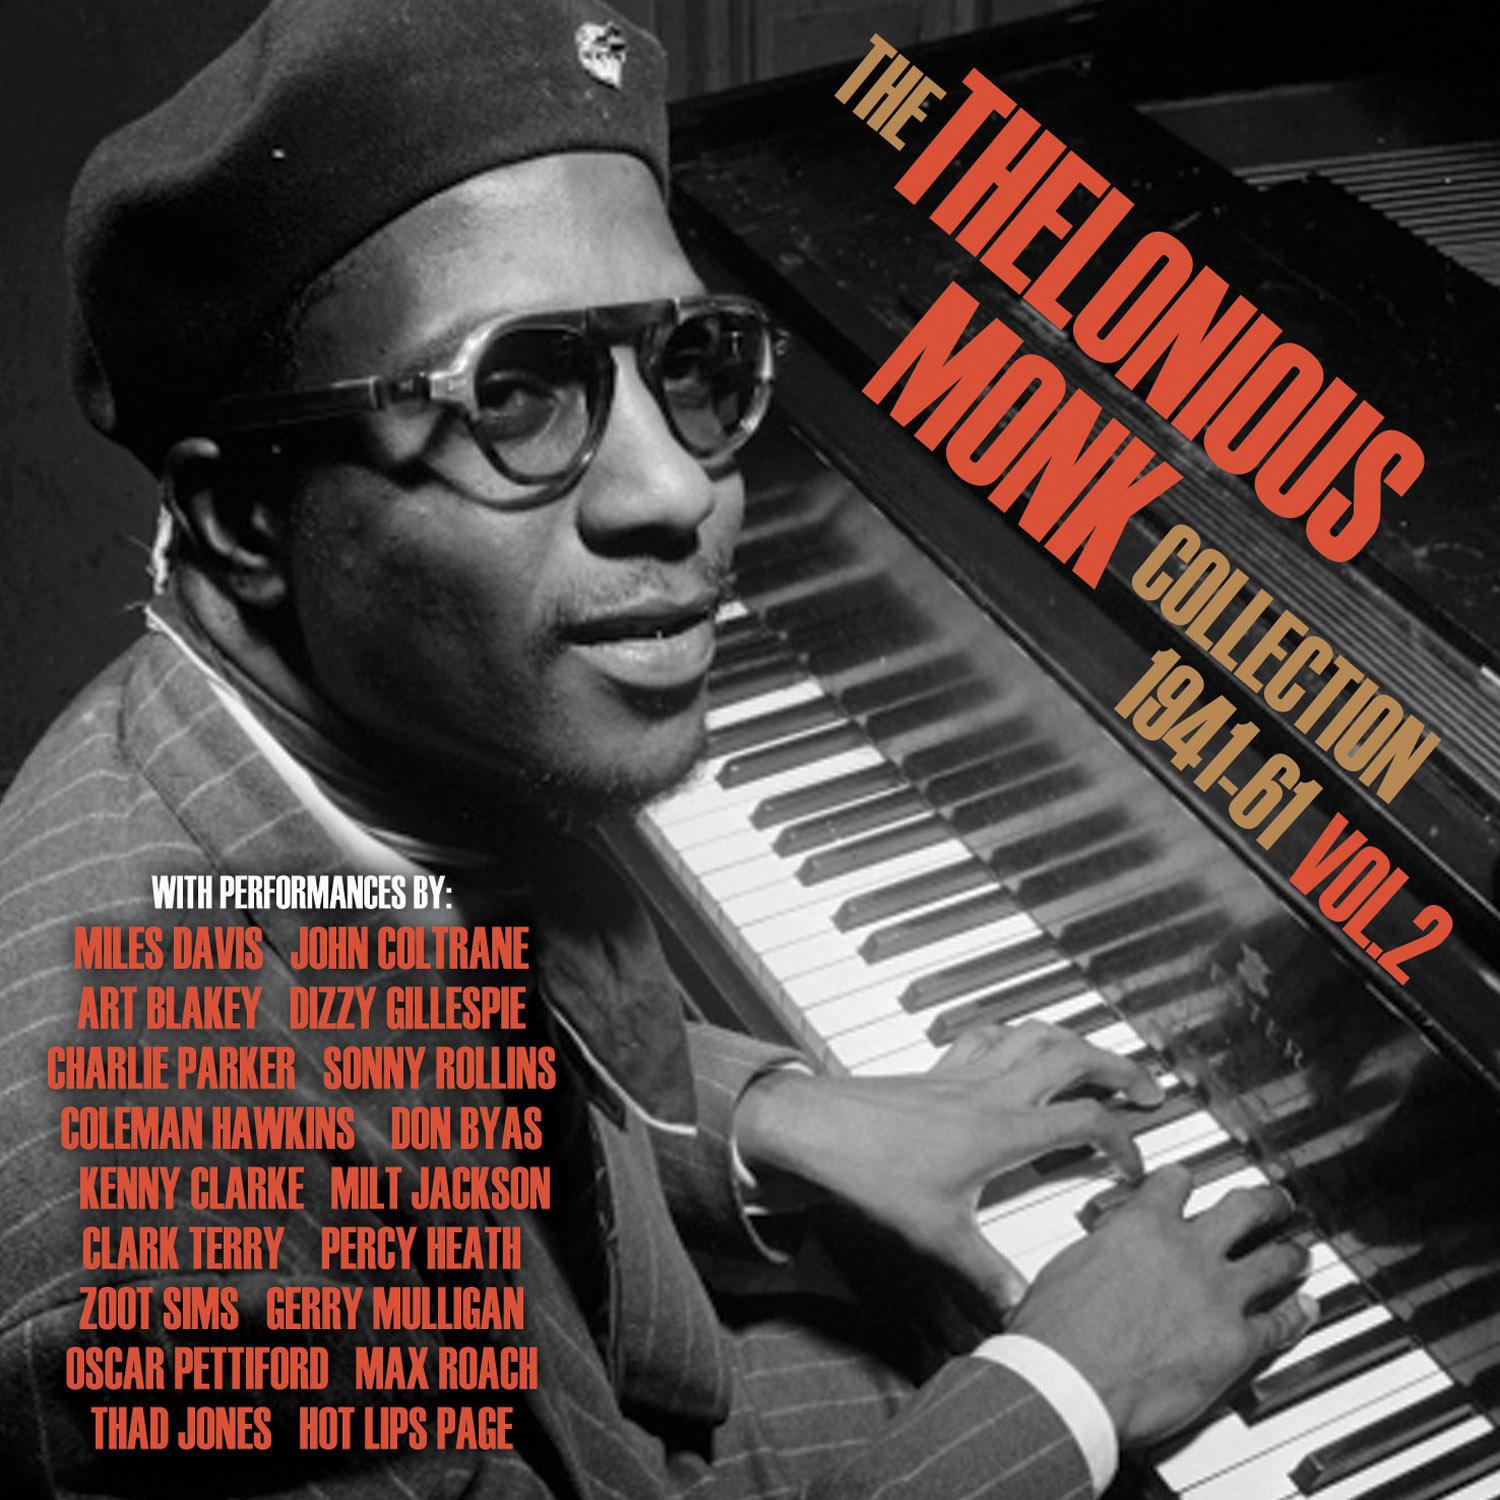 The Thelonious Monk Collection 1941-61, Vol. 2